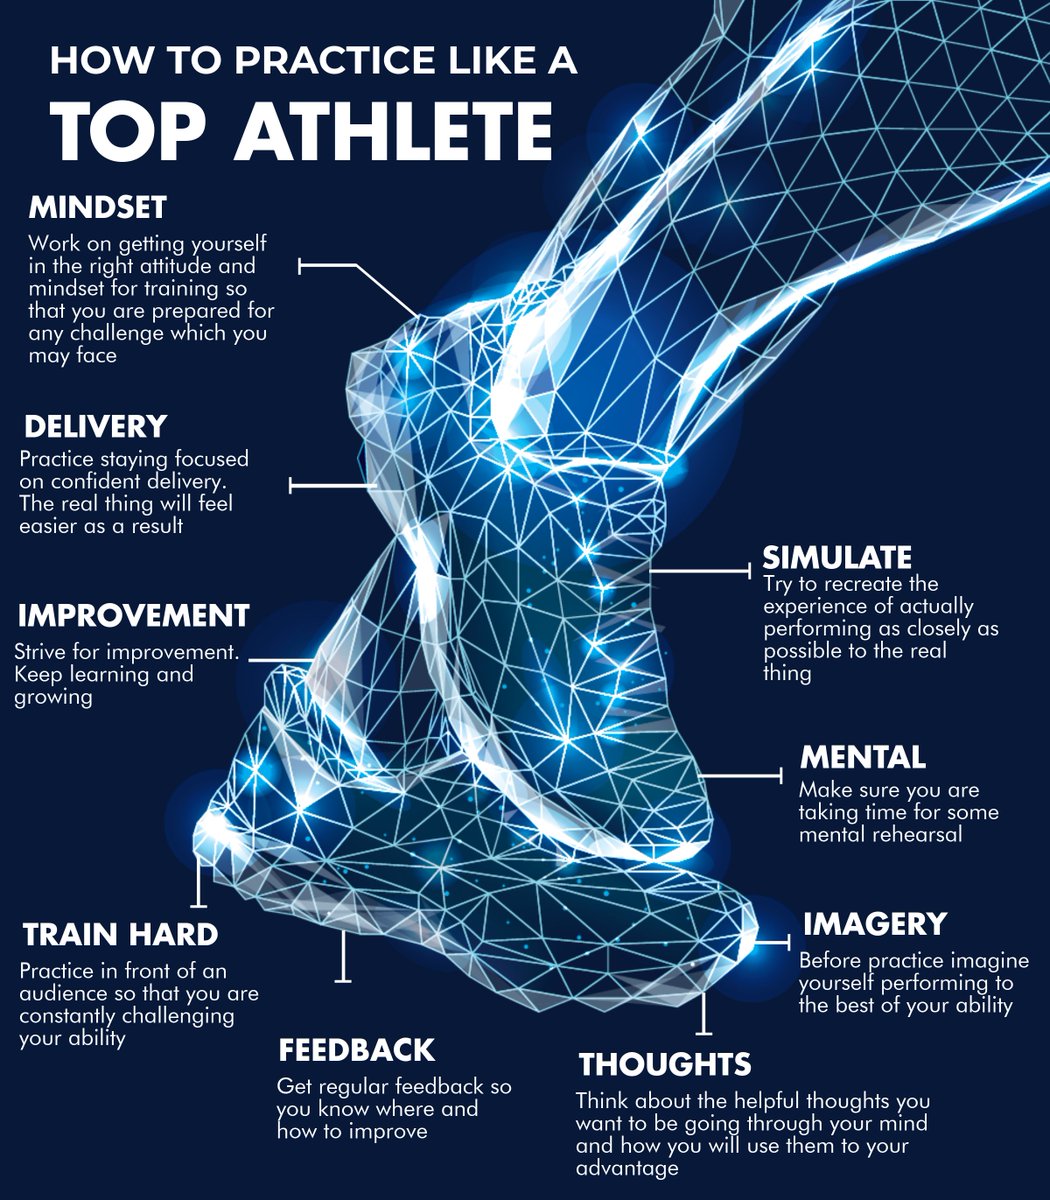 💪 How to Practice like a Top Athlete @karensuttonmd @BelievePHQ #mentalmuscle #athletes